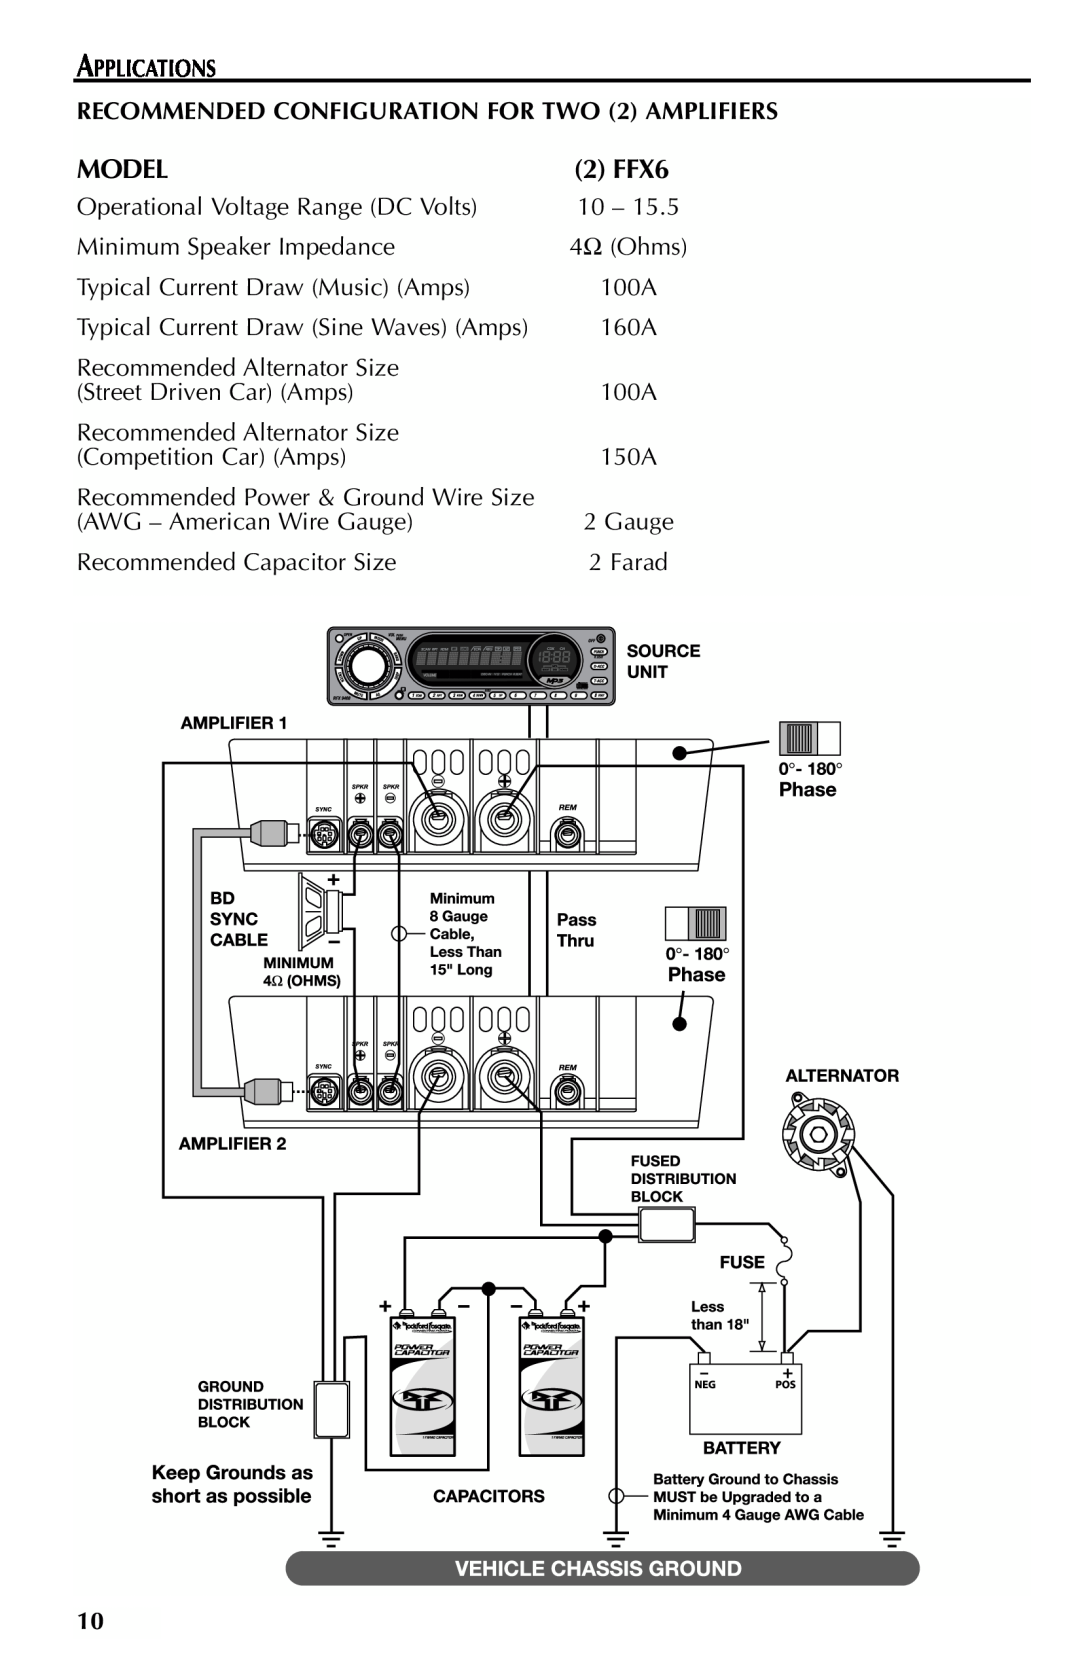 Rockford Fosgate manual Model, 2 FFX6, Applications, RECOMMENDED CONFIGURATION FOR TWO 2 AMPLIFIERS 